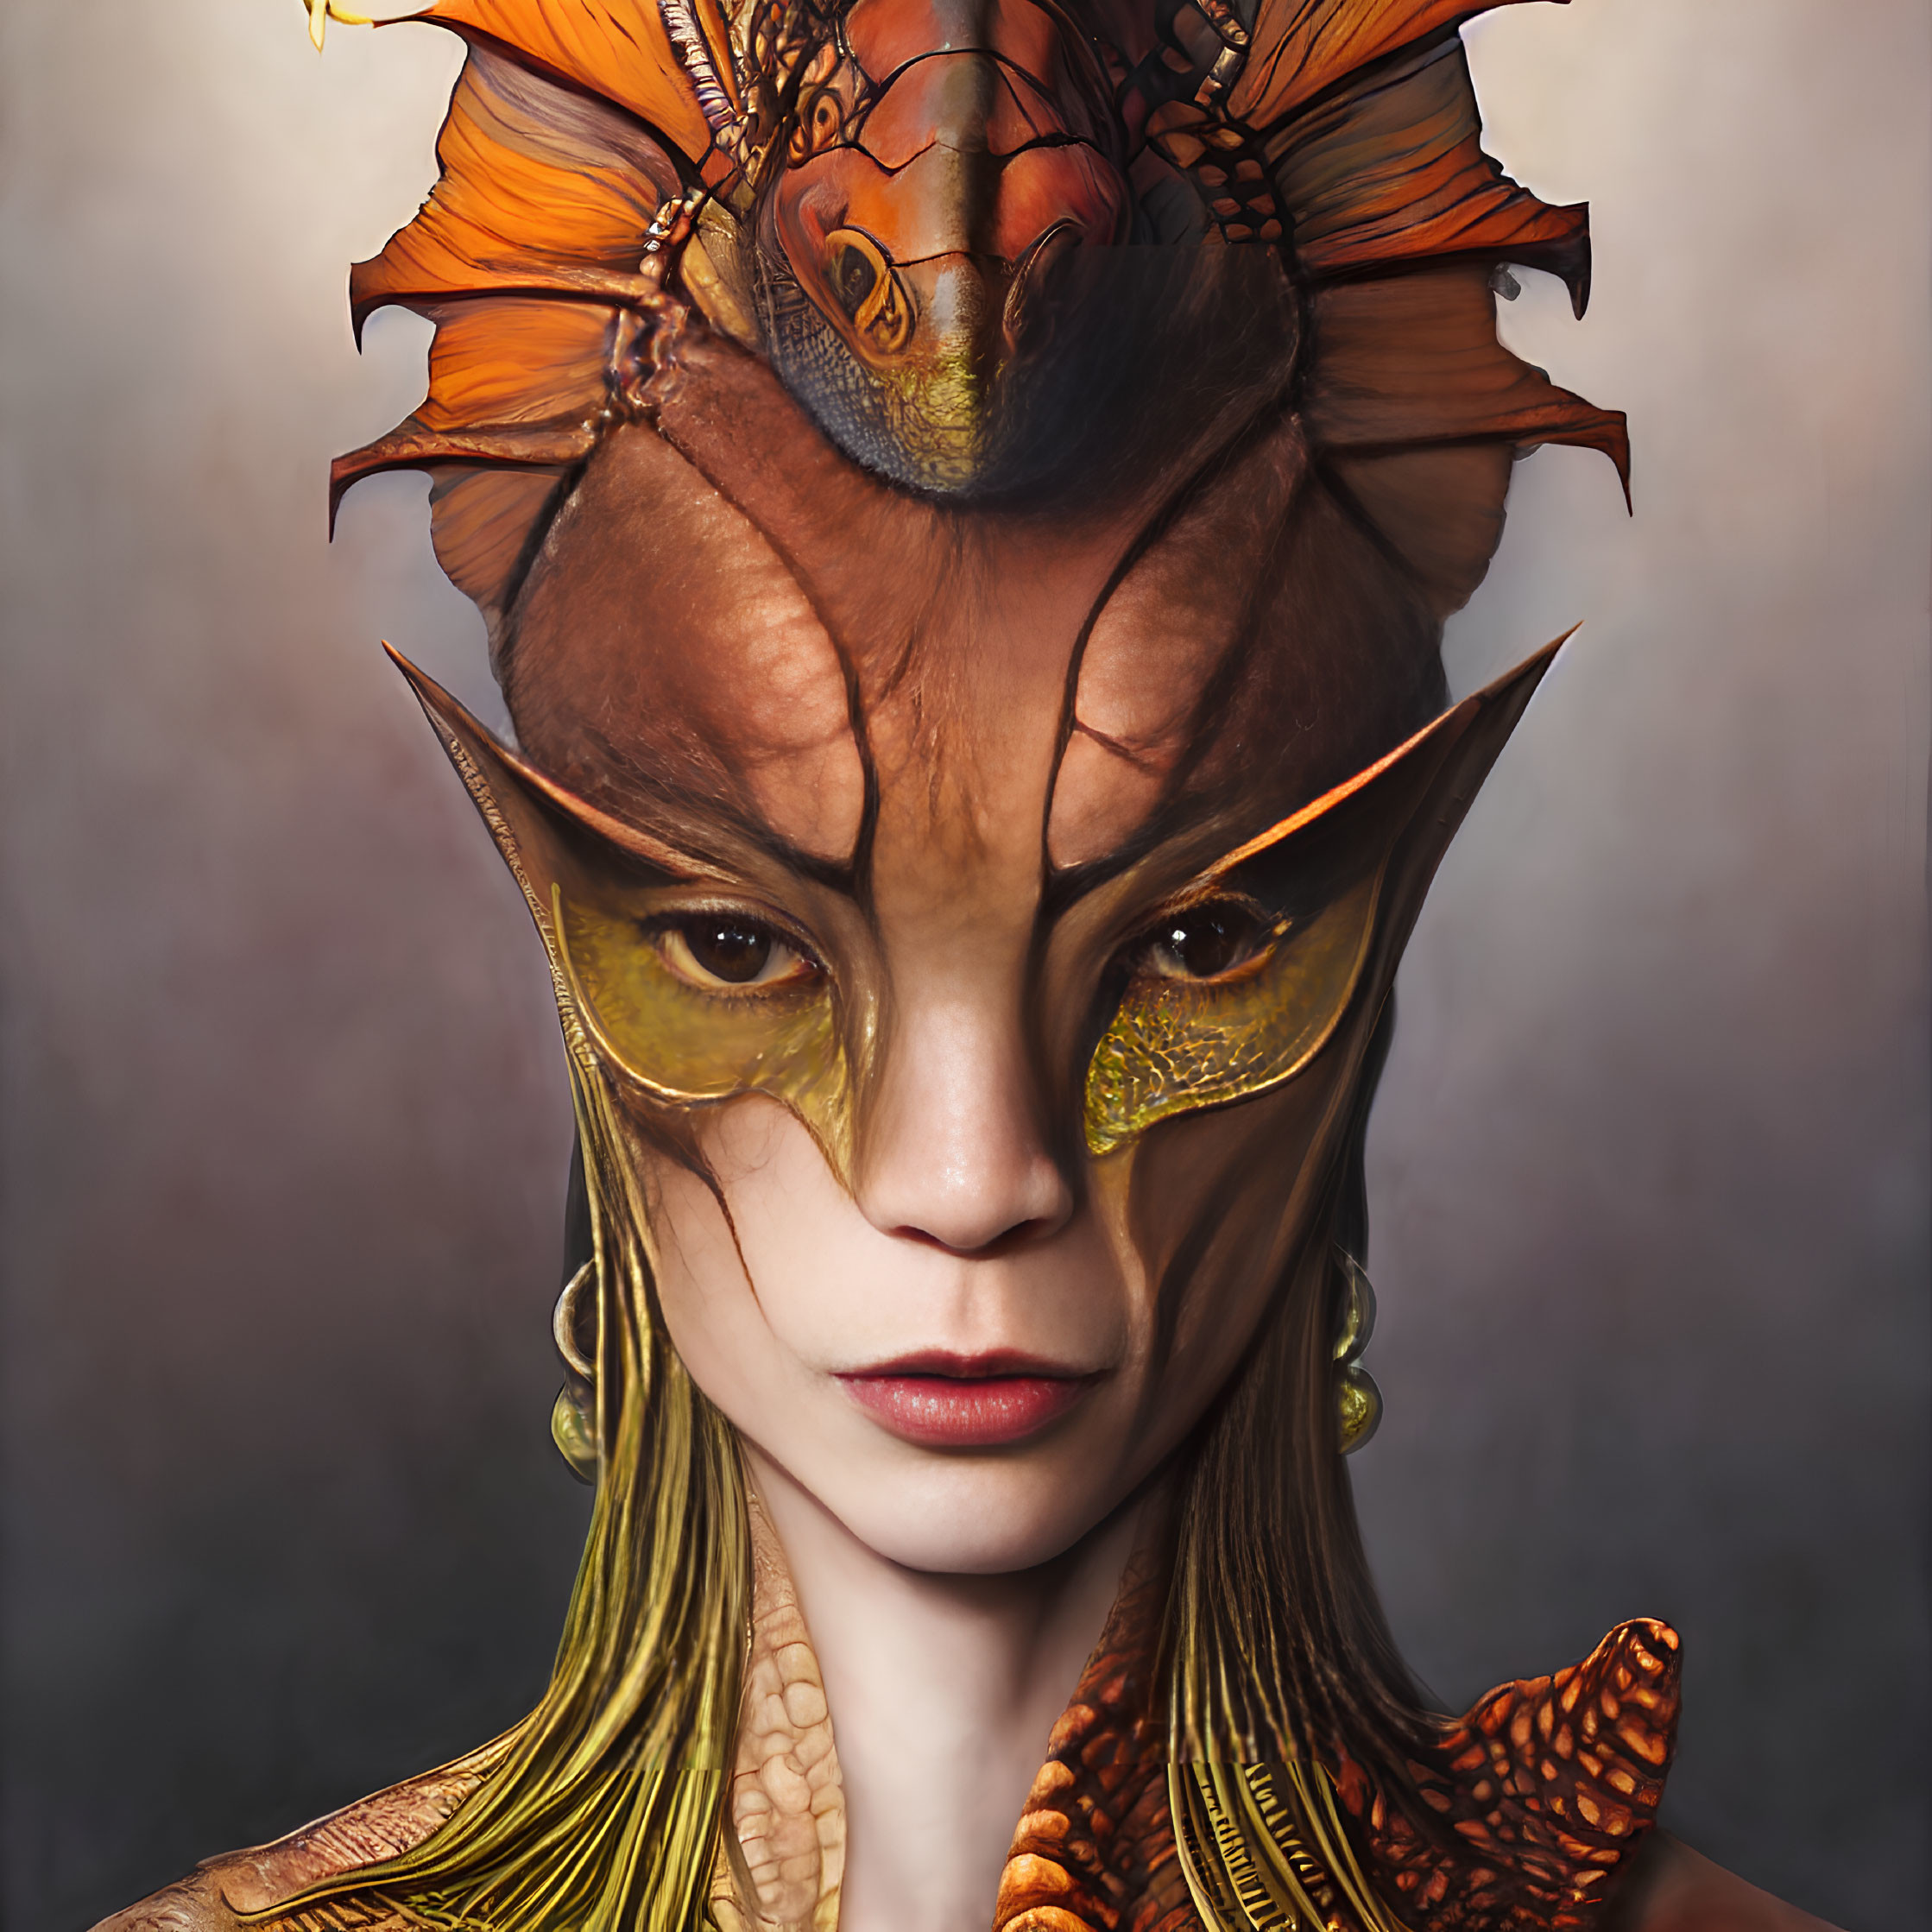 Fantasy portrait of person with lizard-like features and golden skin